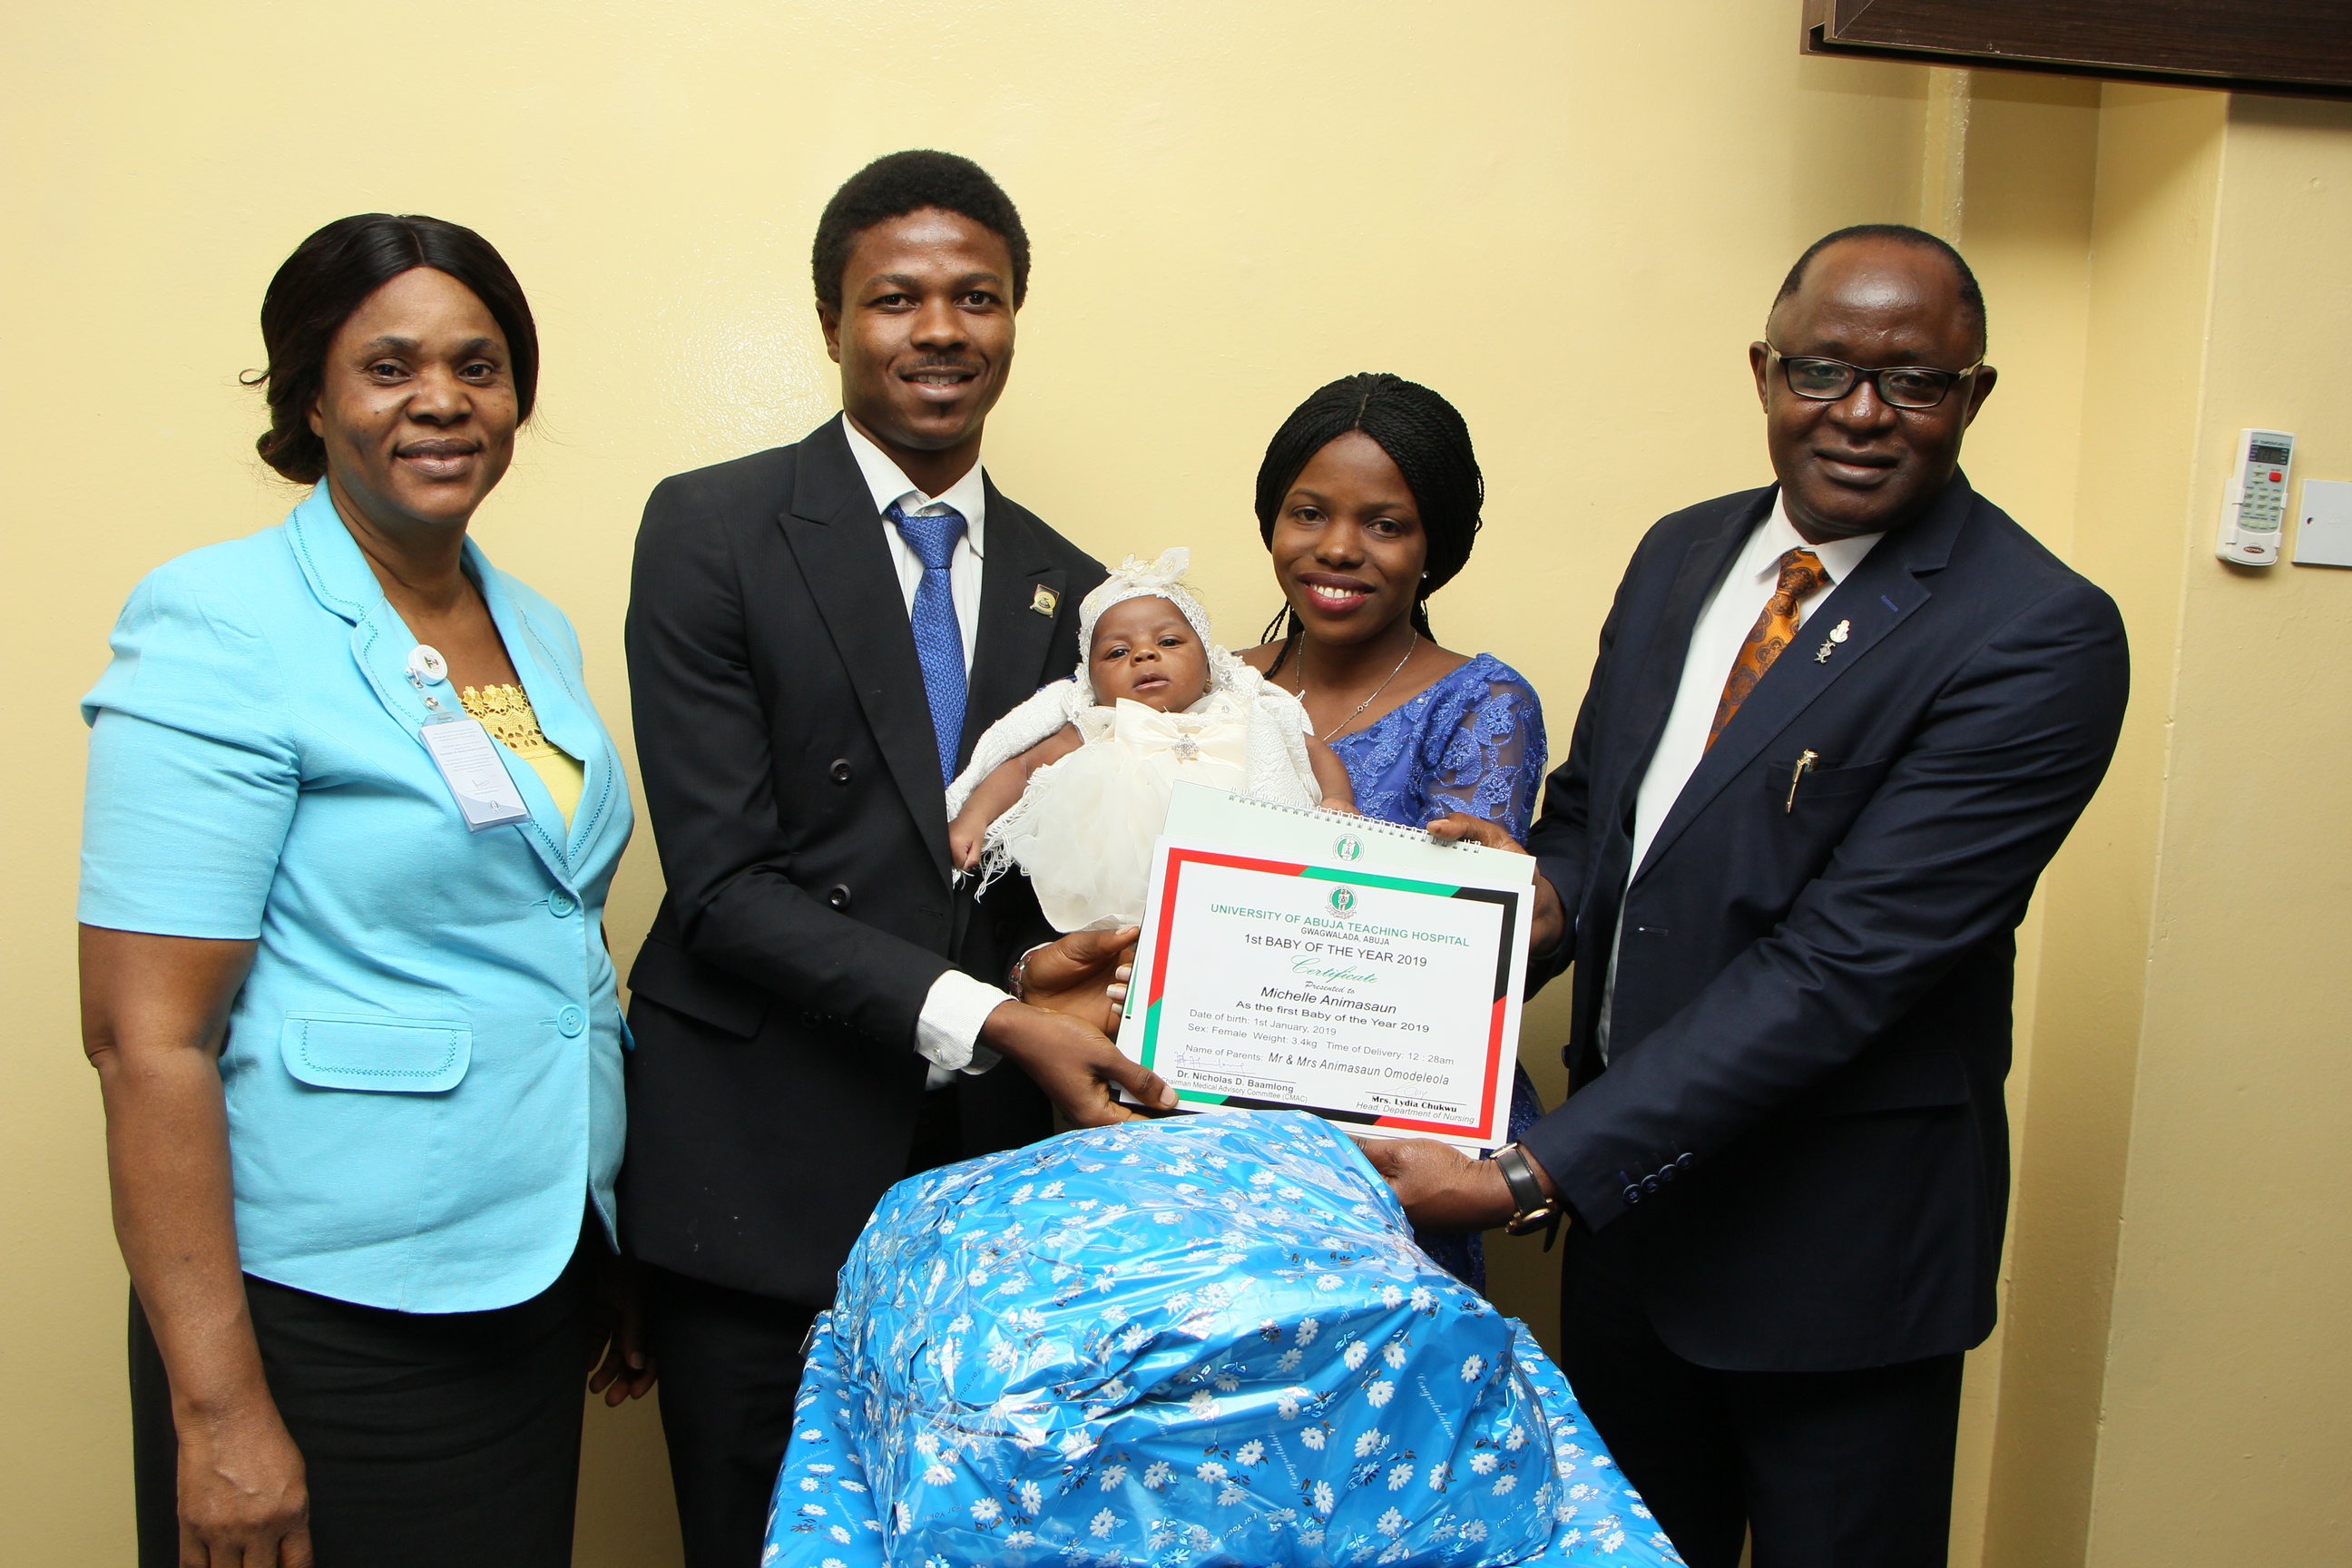 (R) The Chairman, Medical Advisory Committee, University of Abuja Teaching Hospital, Dr. Nicholas Baamlong presenting gifts to the baby with her parents. On the left is the Head, Department of Nursing, University of Abuja Teaching Hospital, Mrs. Lydia Chukwu.